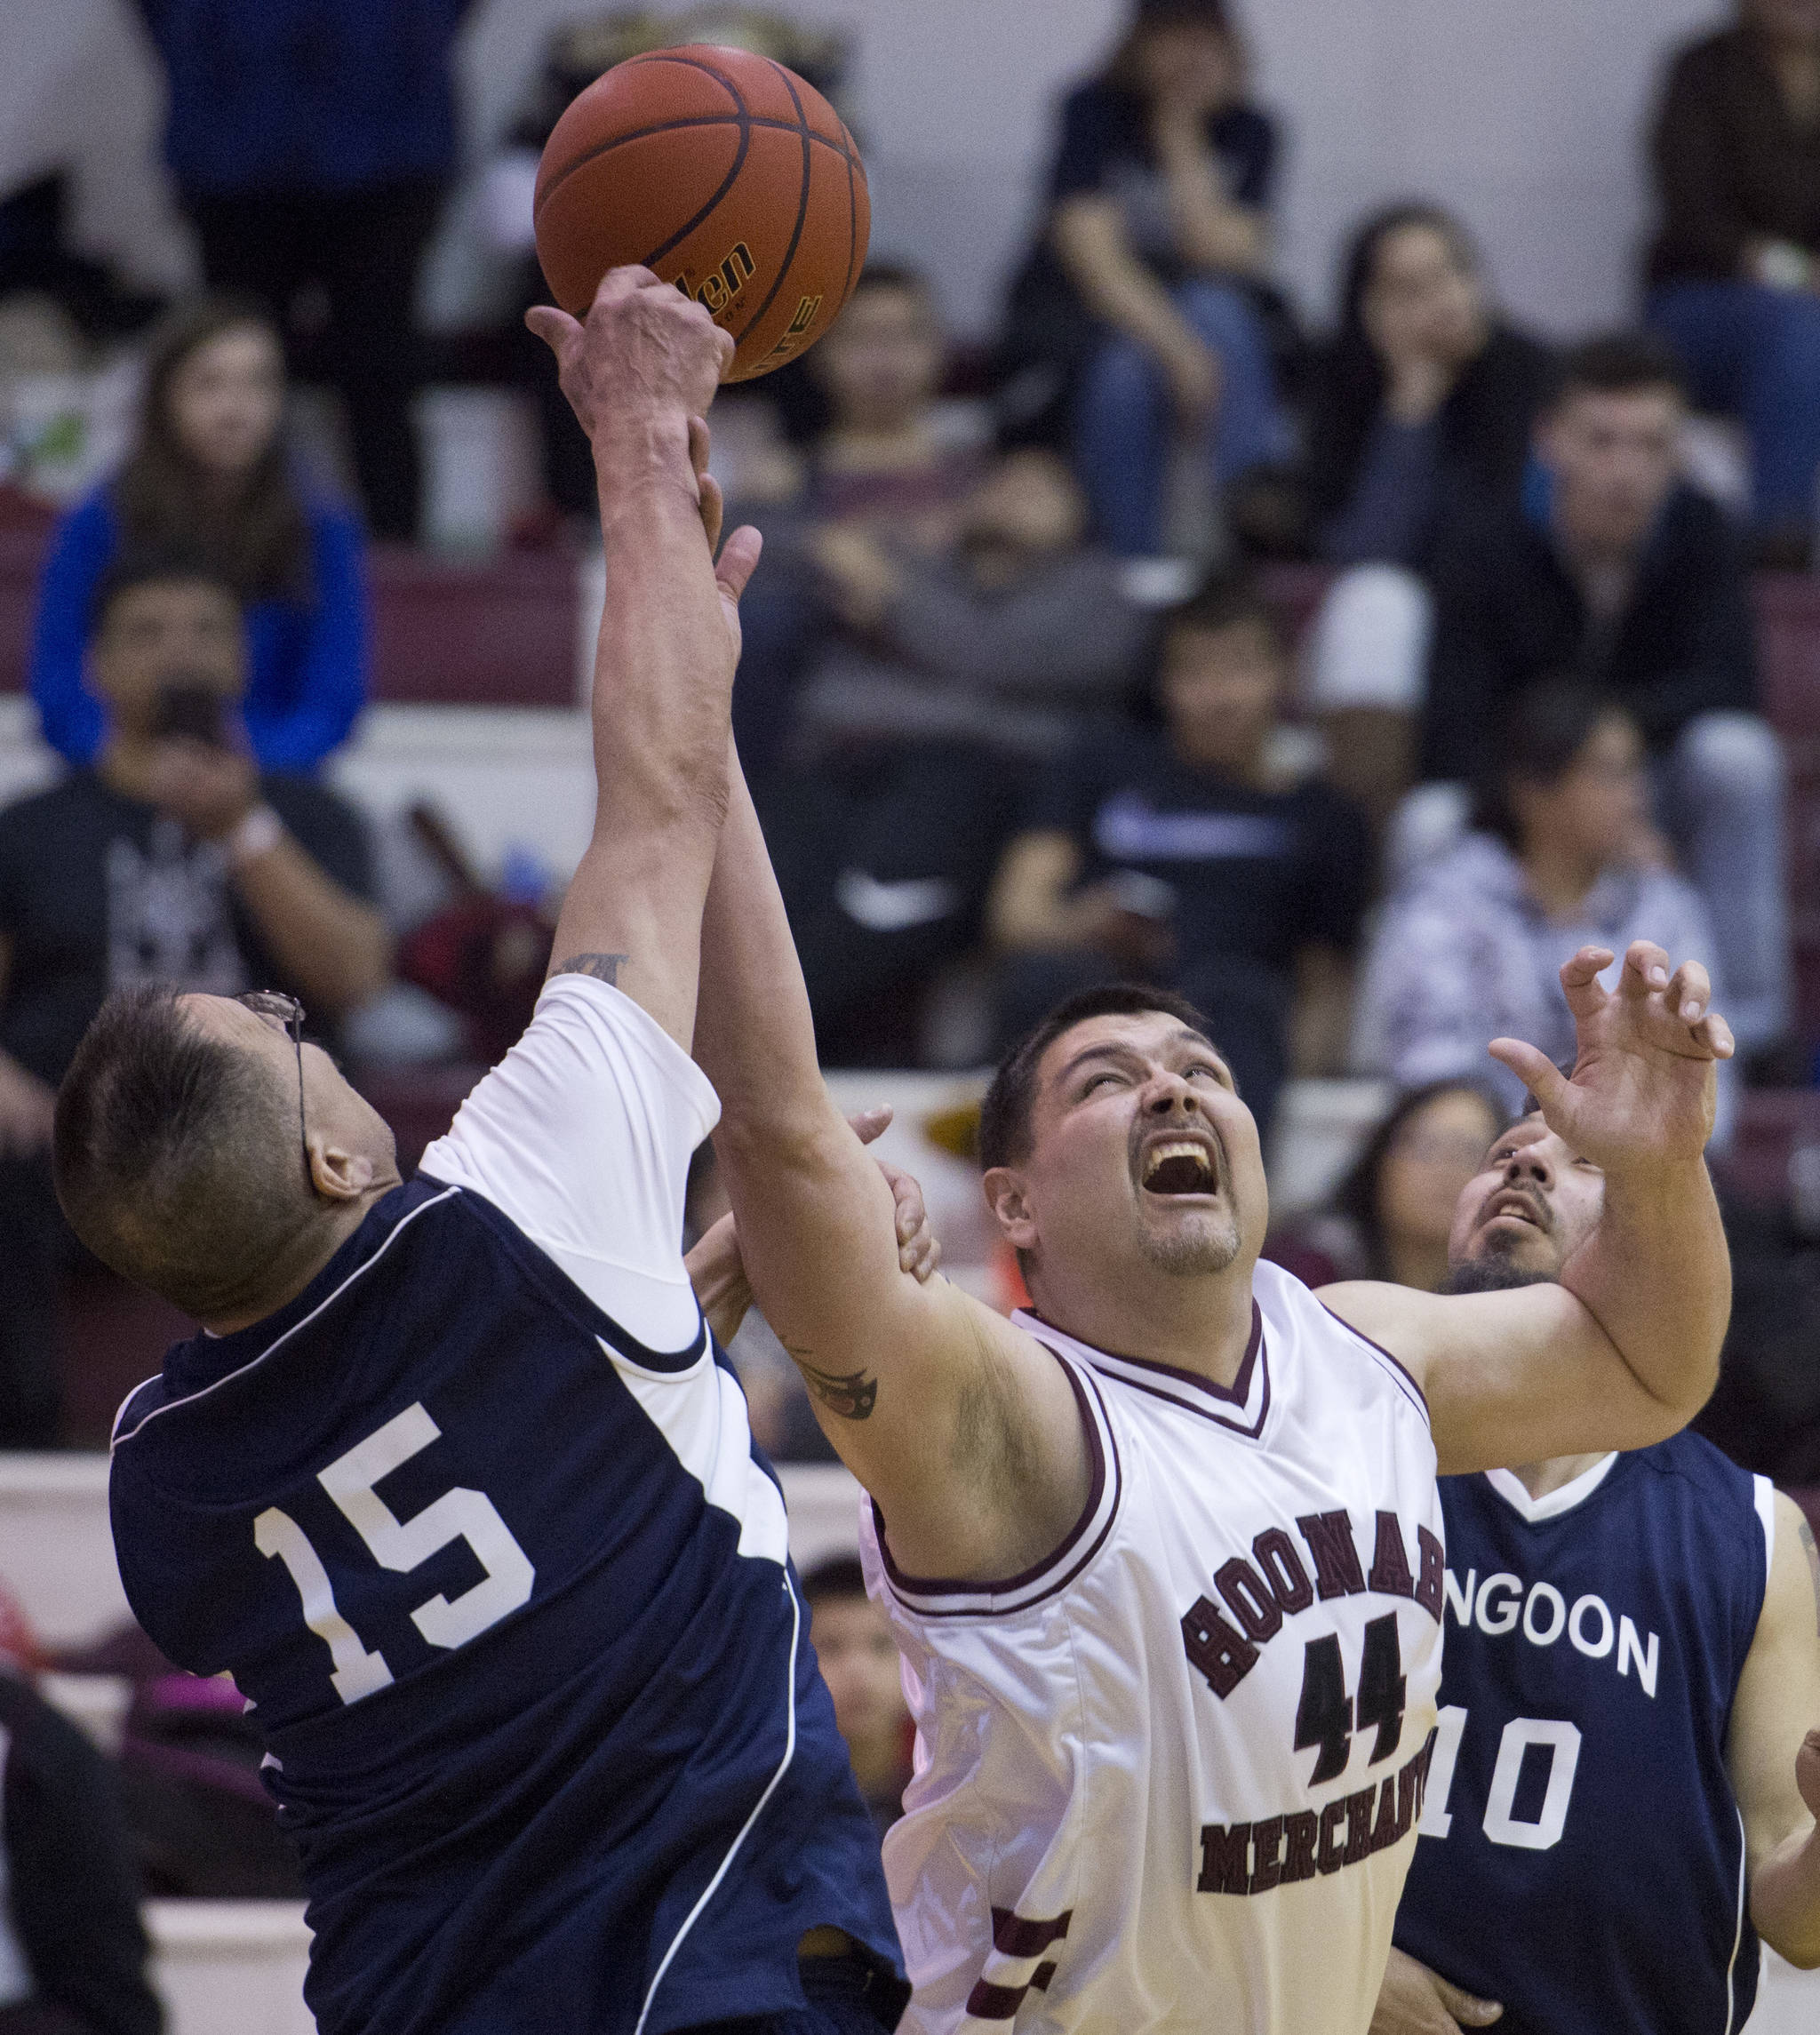 Angoon’s Randy Gamble, left, and Hoonah’s Mike Mills compete for a rebound in their Masters Bracket game in the Lions Club’s Gold Medal Basketball Tournament at Juneau-Douglas High School on Thursday, March 23, 2017.Angoon’s Randy Gamble, left, and Hoonah’s Mike Mills compete for a rebound in their Masters Bracket game in the Lions Club’s Gold Medal Basketball Tournament at Juneau-Douglas High School on Thursday, March 23, 2017. (Michael Penn | Juneau Empire)